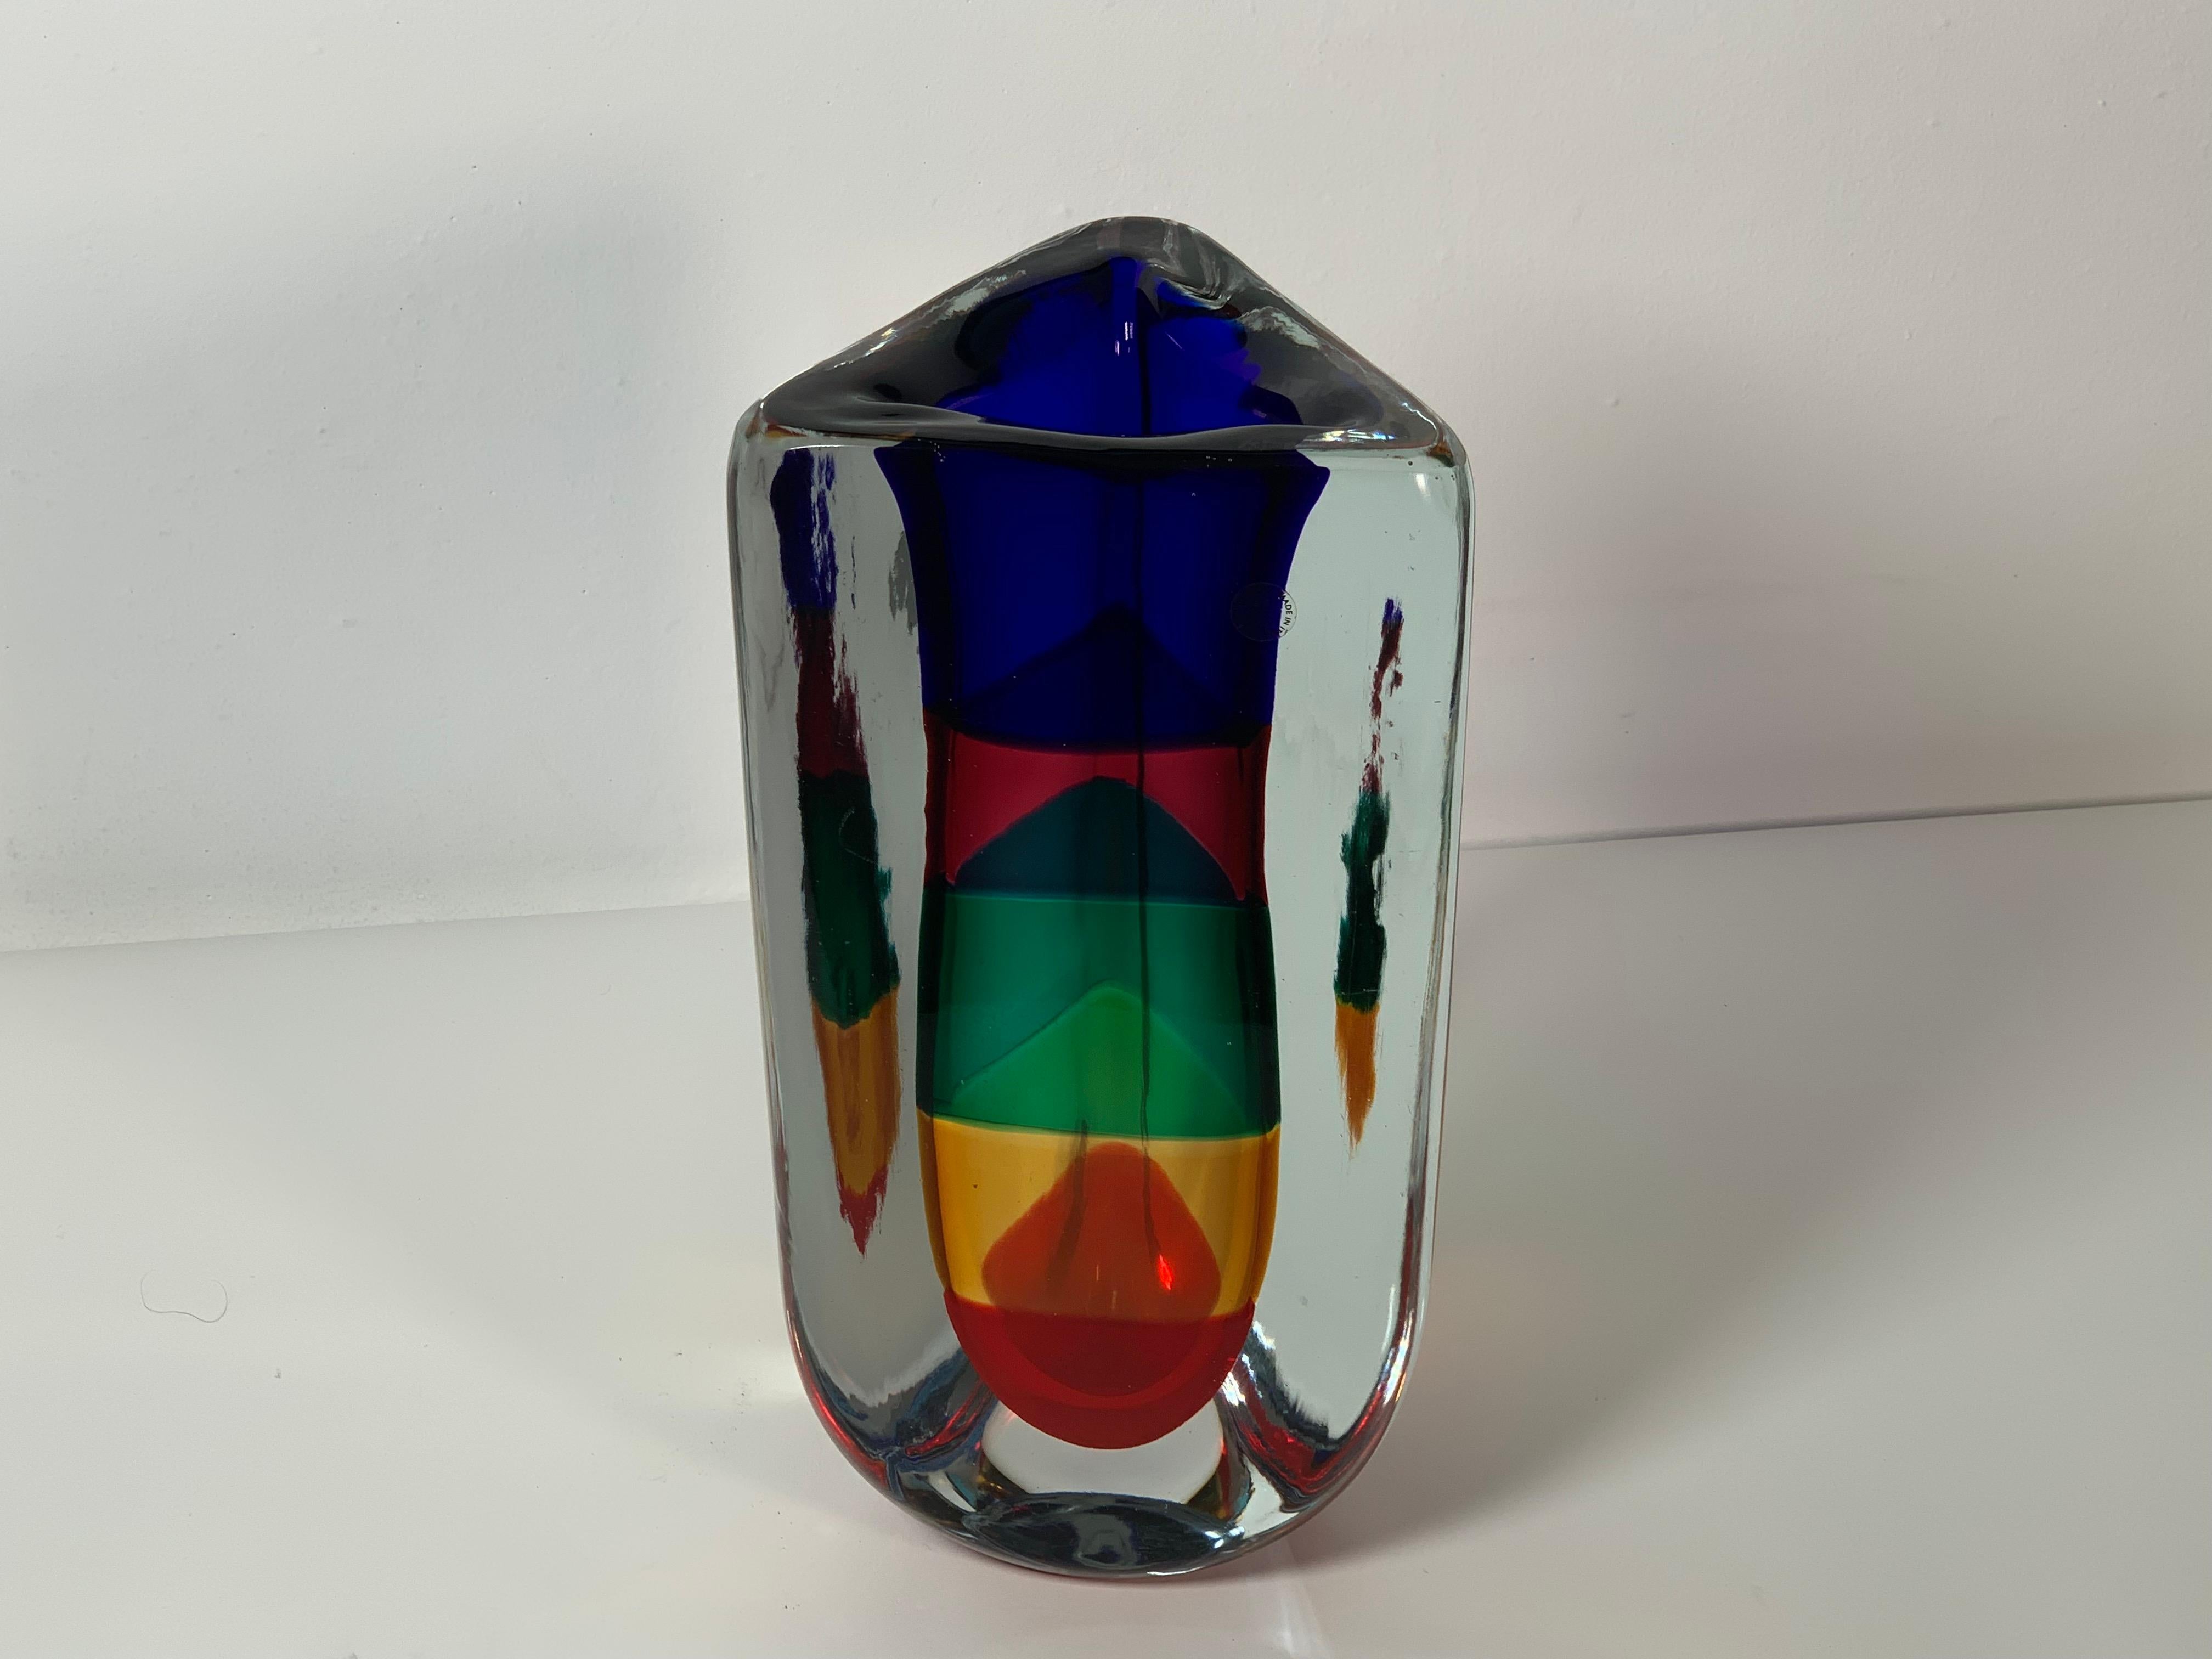 Fasce Sommerse vase designed by Fulvio Bianconi and produced by Venini in 1994. Signed.

Biography:
Fulvio Bianconi settled in Milan and collaborated throughout his life with the Milanese publishing houses Mondadori, Bompiani and Garzanti as a